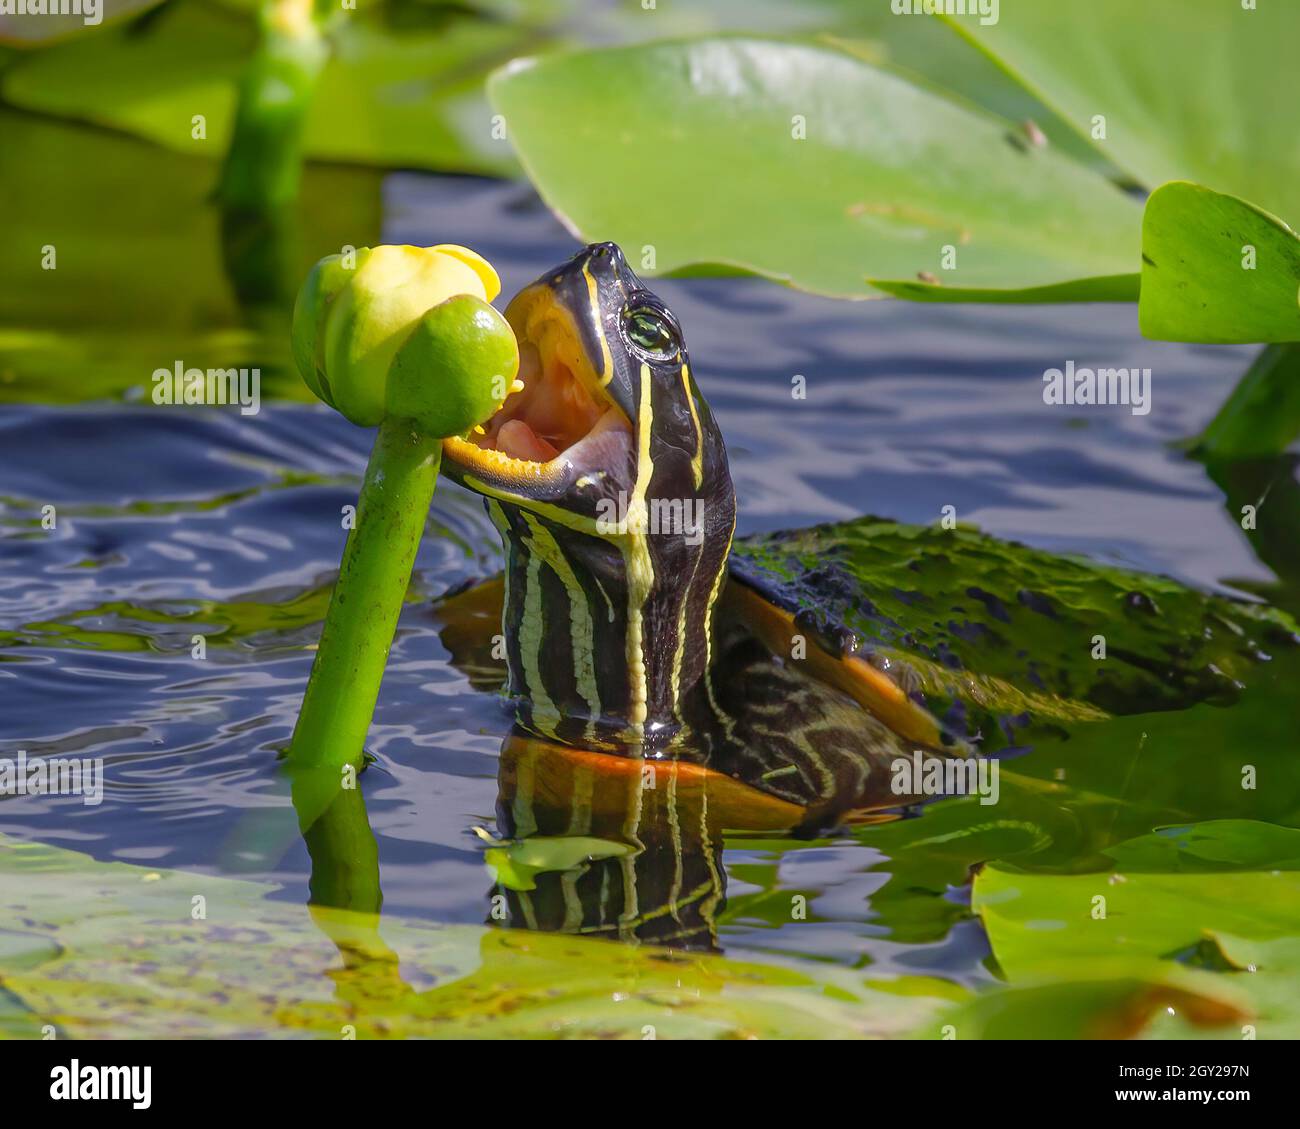 A cooter turtle snacks on a lily flower bud. The Cooter Turtle is one of the most common freshwater turtles in the Florida Everglades. Stock Photo